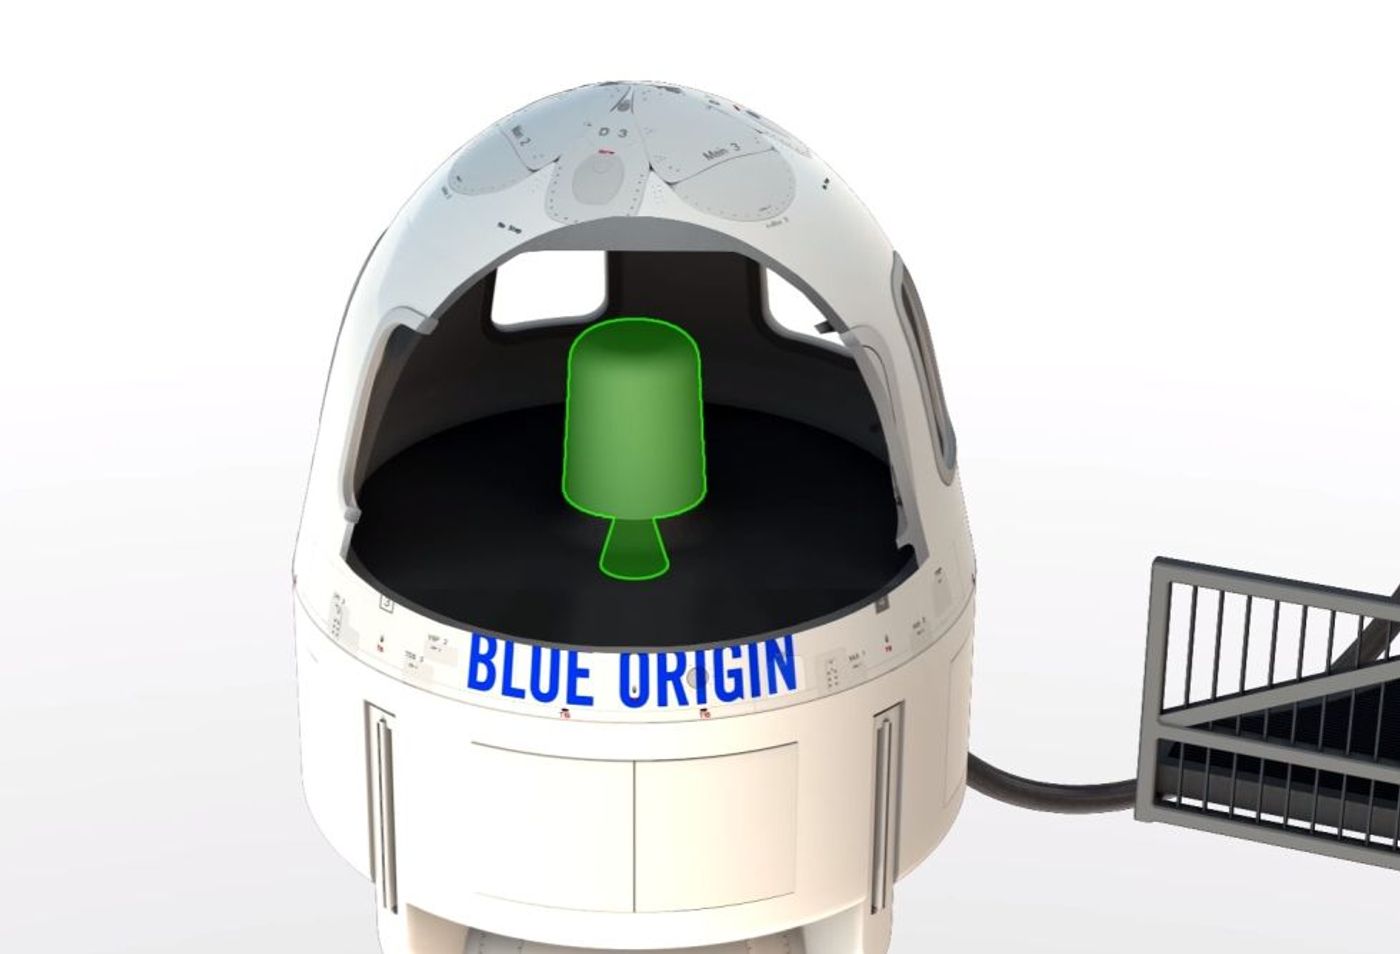 Blue Origin's New Shepard rocket's payload has a small motor that can get it away from the booster rocket for safe landing in emergencies.